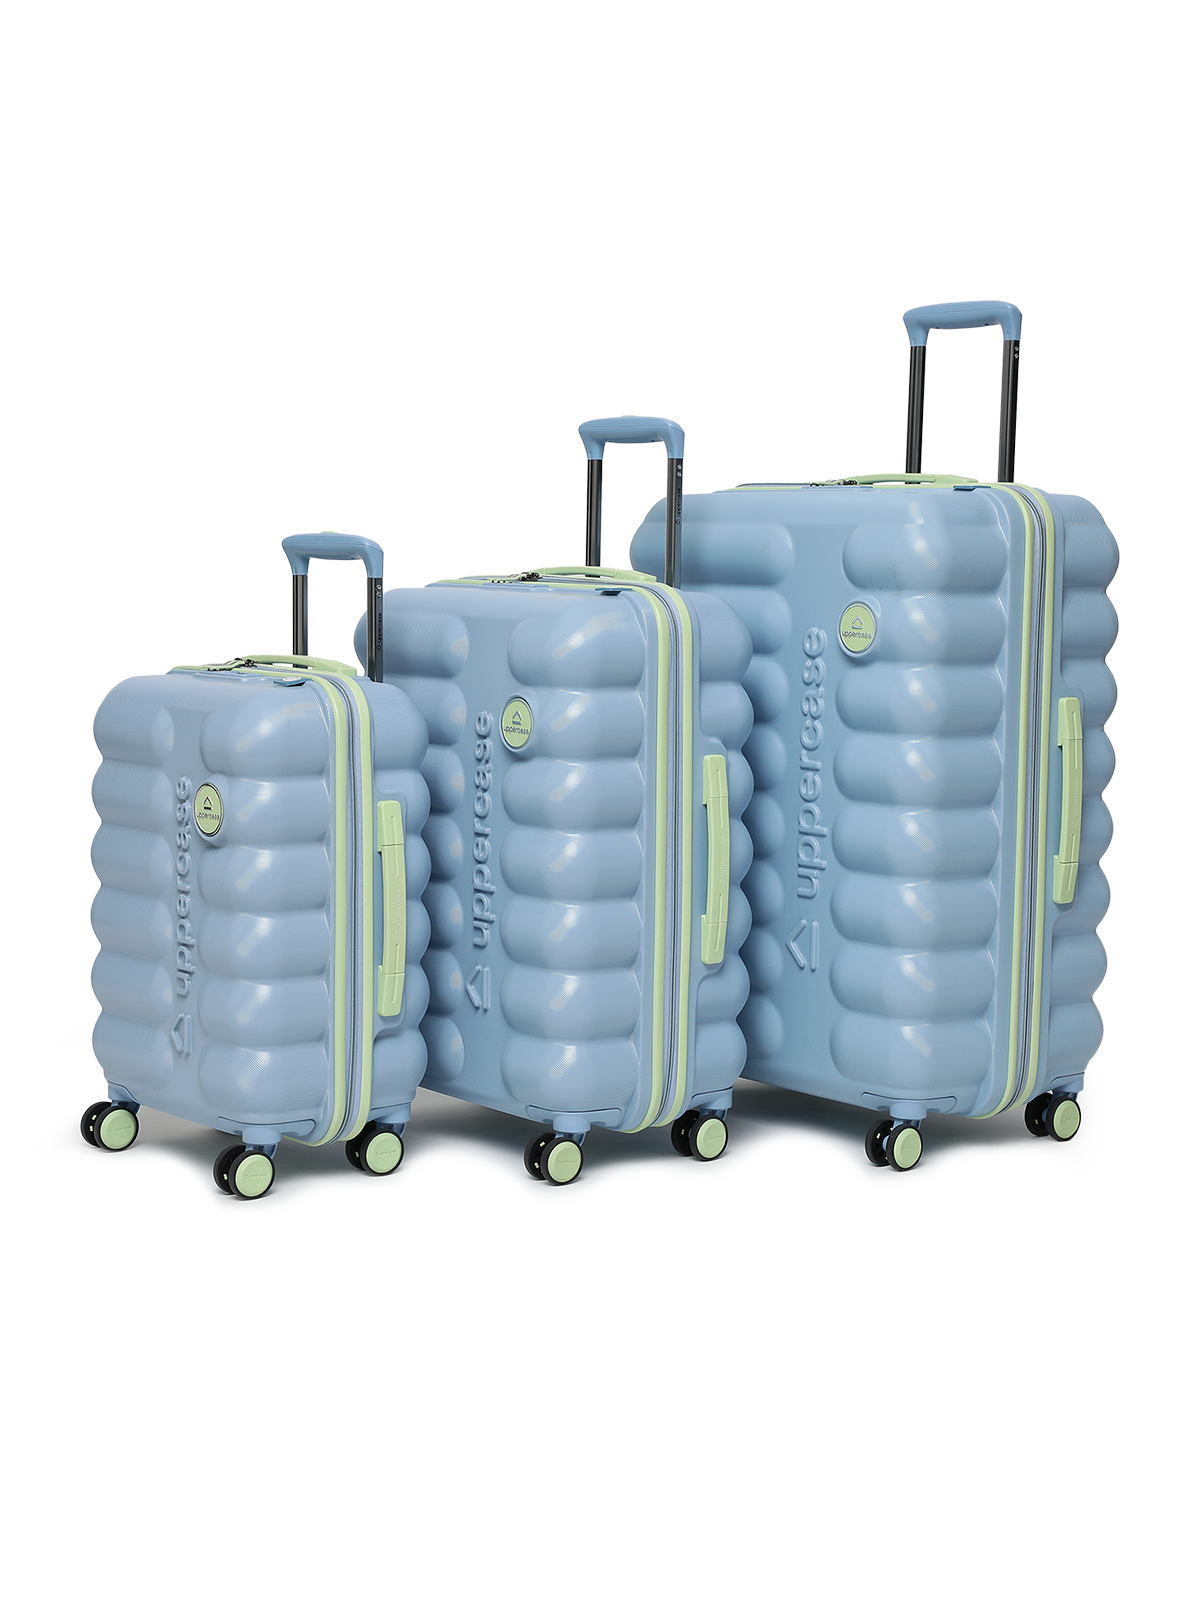 uppercase Astro Trolley Bag Set of 3 (S+M+L) Cabin & Check-in Hardsided Trolley Bag Flushed TSA Lock & Anti-Theft Zippers Dual Wheel Suitcase for Men & Women 2000 Days Warranty (Powder Blue)